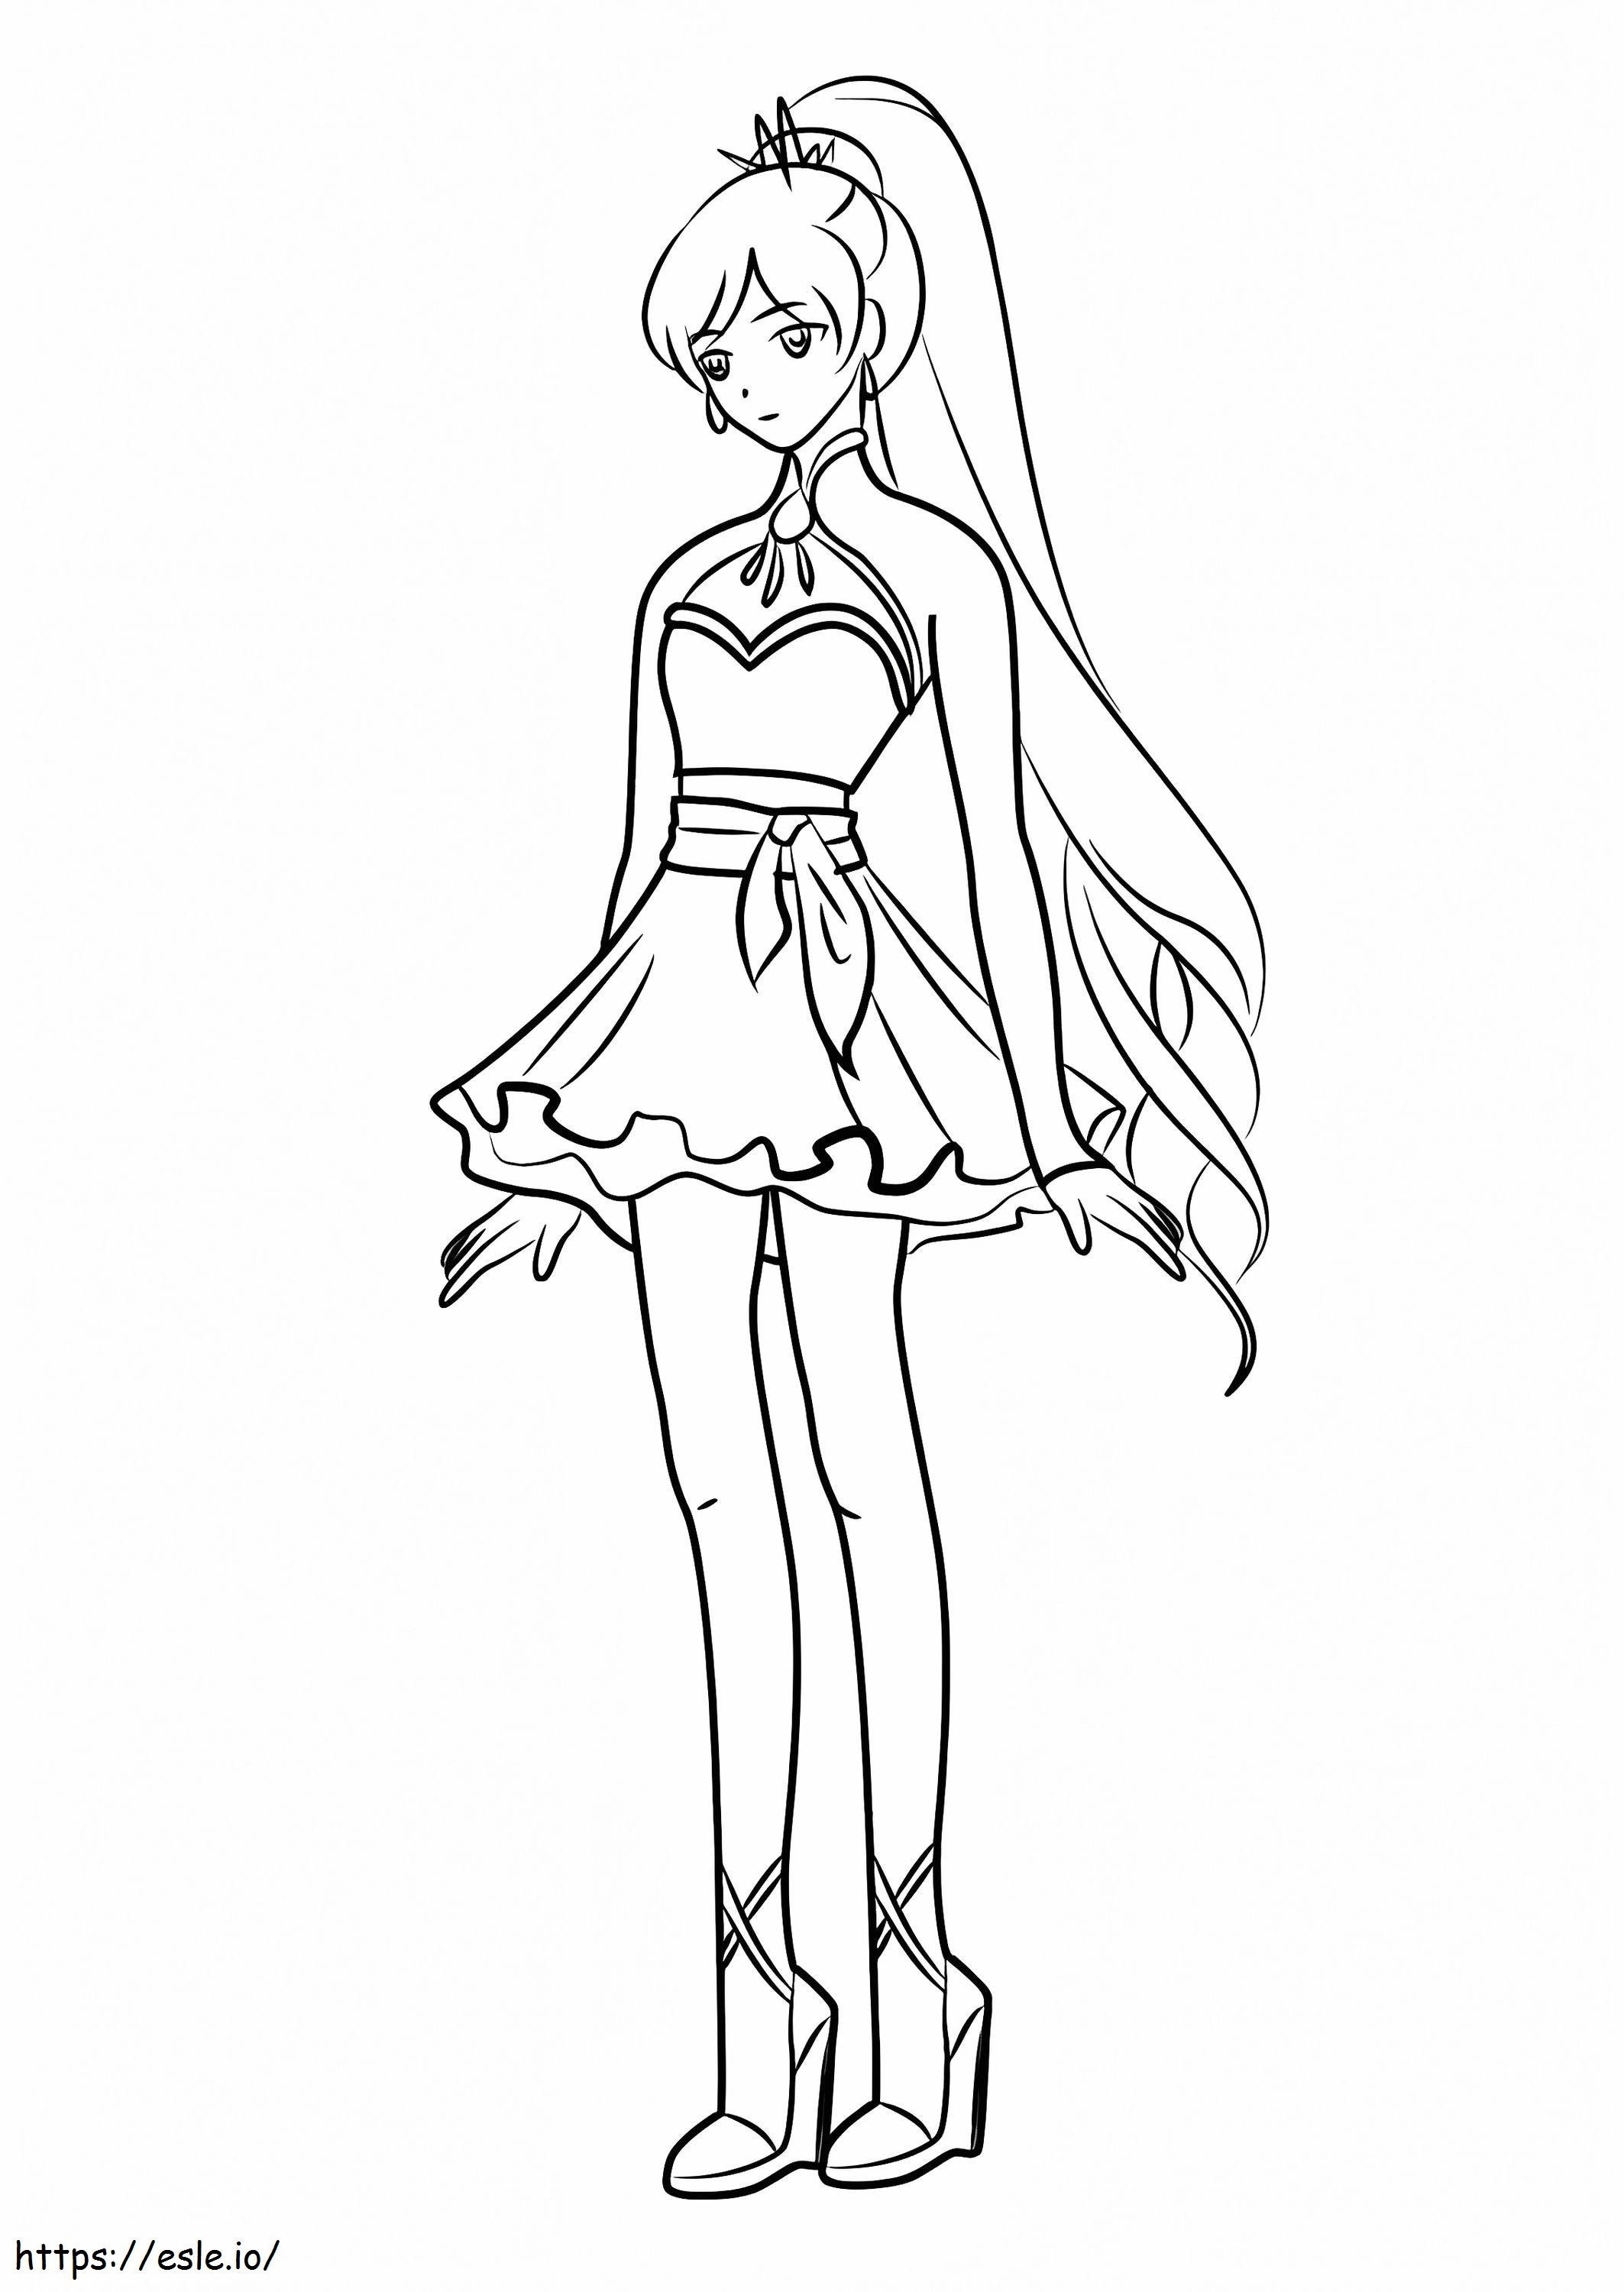 Weiss Schnee From RWBY coloring page